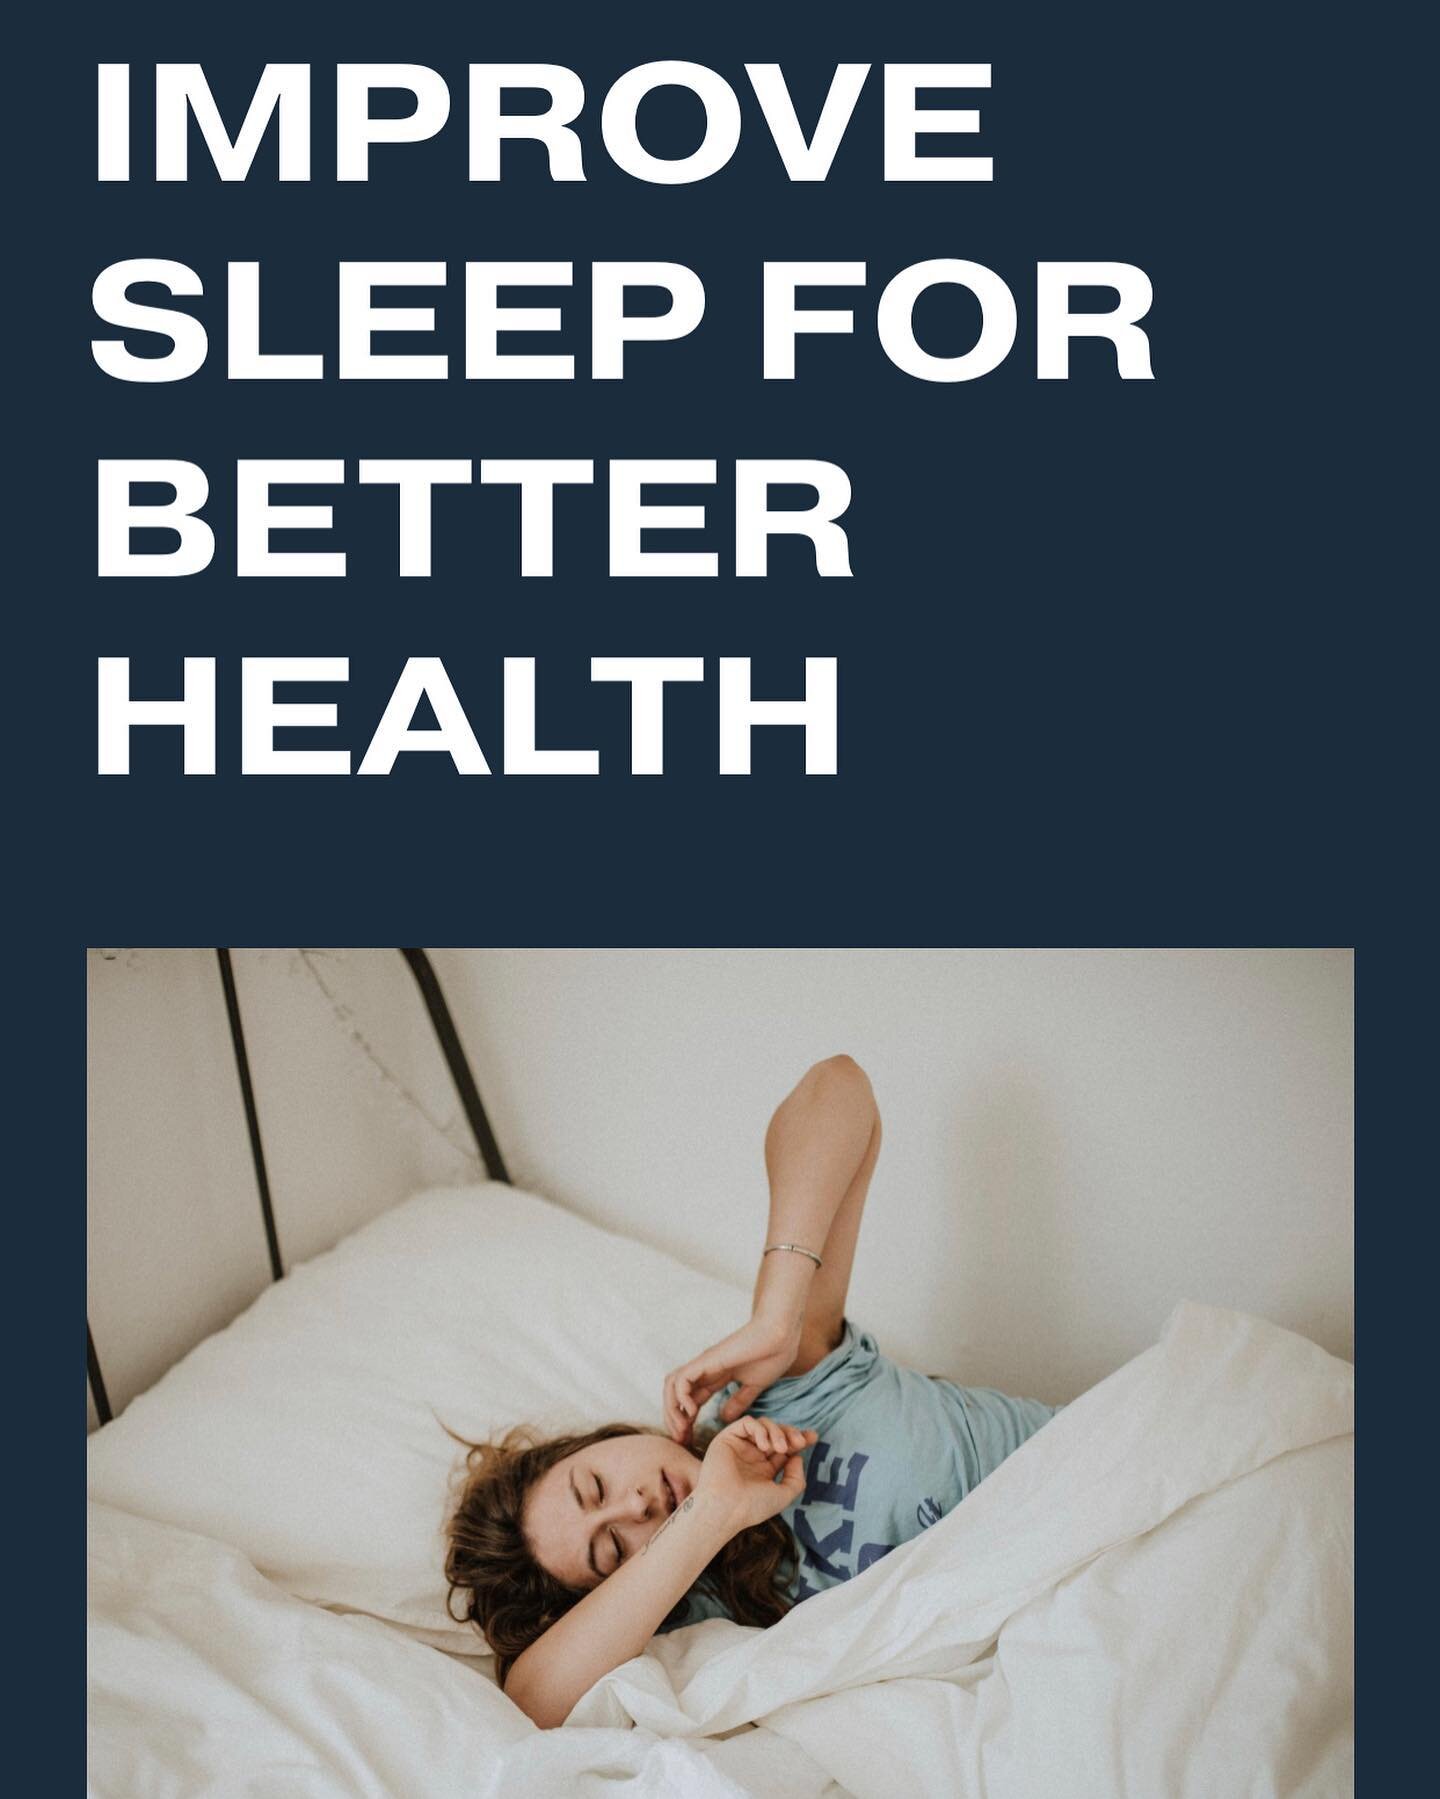 **NEW BLOG POST**
When I see patients in my office, we always discuss sleep. It is a critical component in creating a good foundation for health and reversing disease. 
Read more about how you can improve your sleep on my blog @ natmedidaho.com 
-
-
